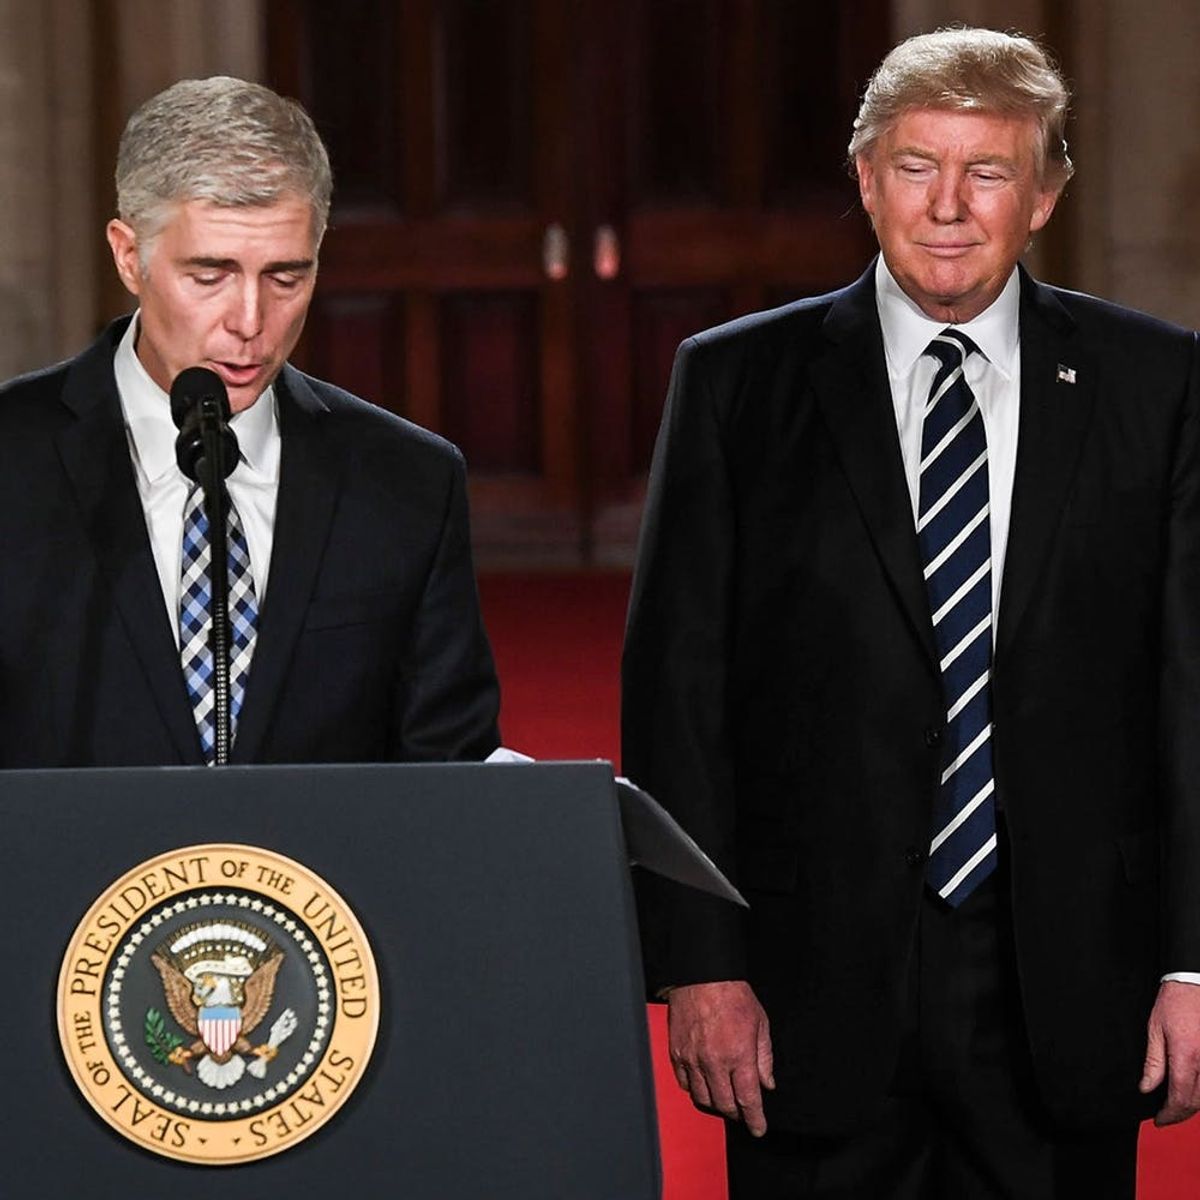 Here’s Where Trump’s Supreme Court Pick Stands on the Issues That Affect Your Life